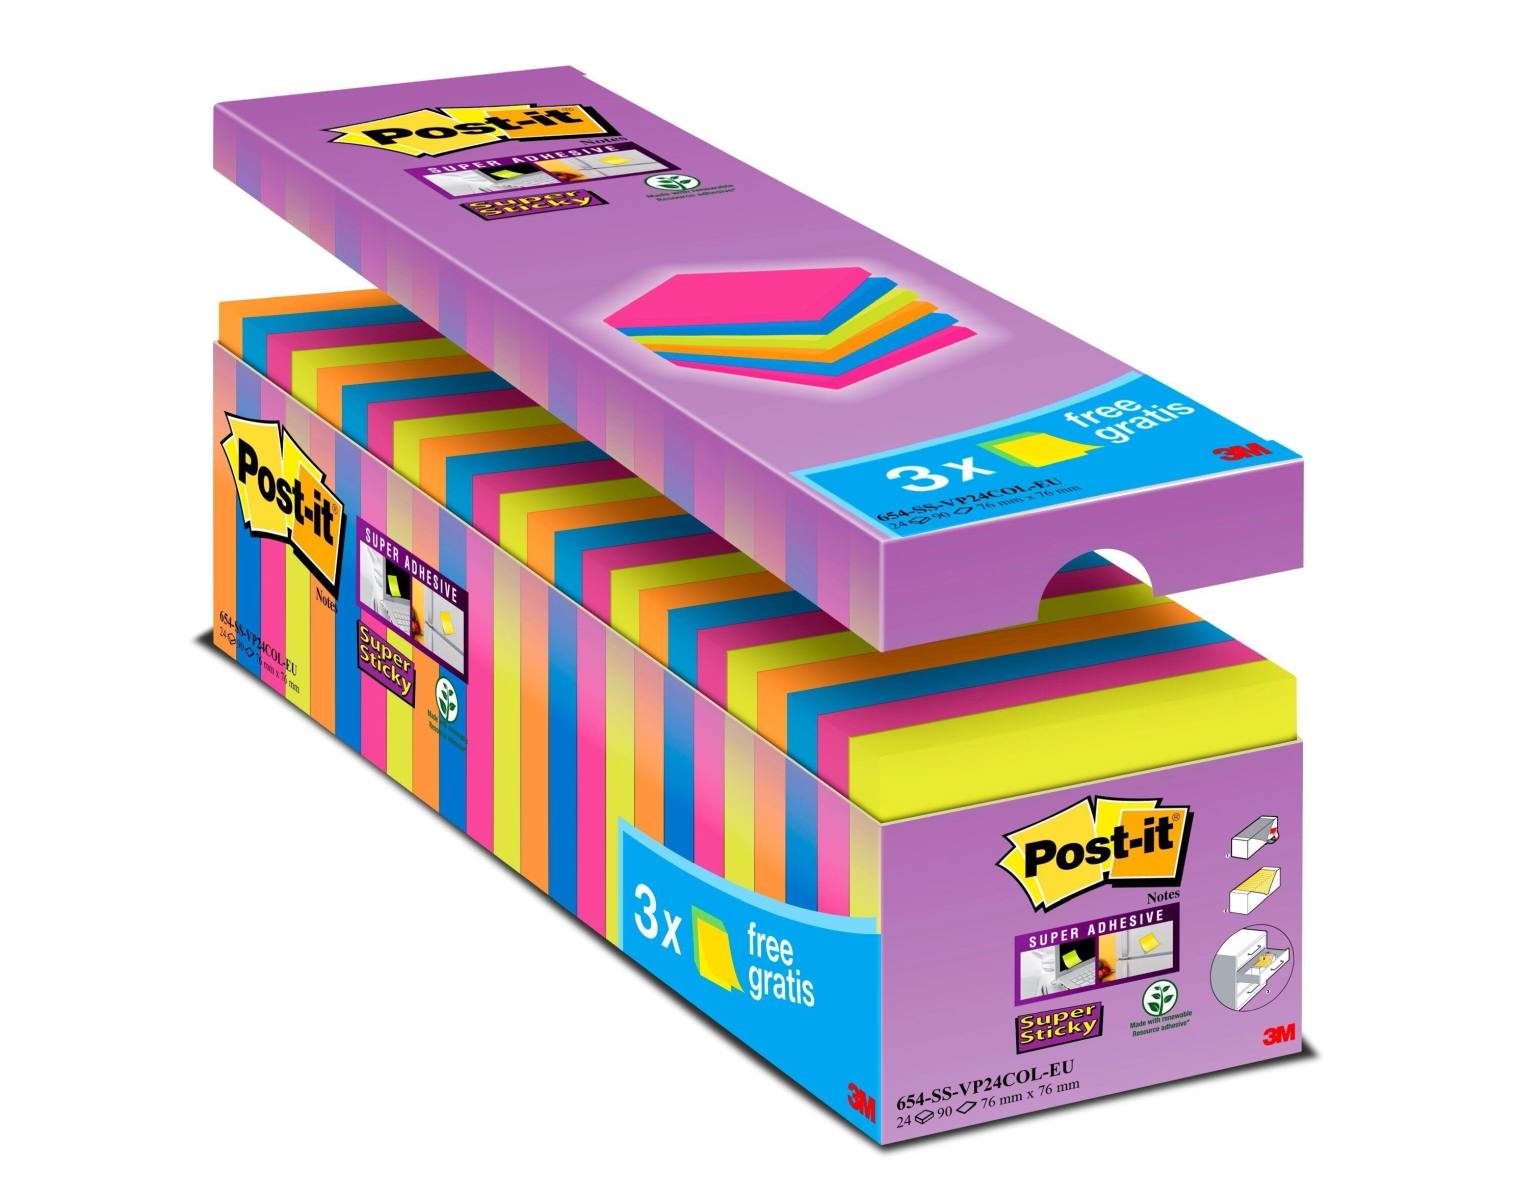 3M Post-it Super Sticky Notes Promotion 654SE24P, 24 pads of 90 sheets at a special price, assorted colours, 76 mm x 76 mm